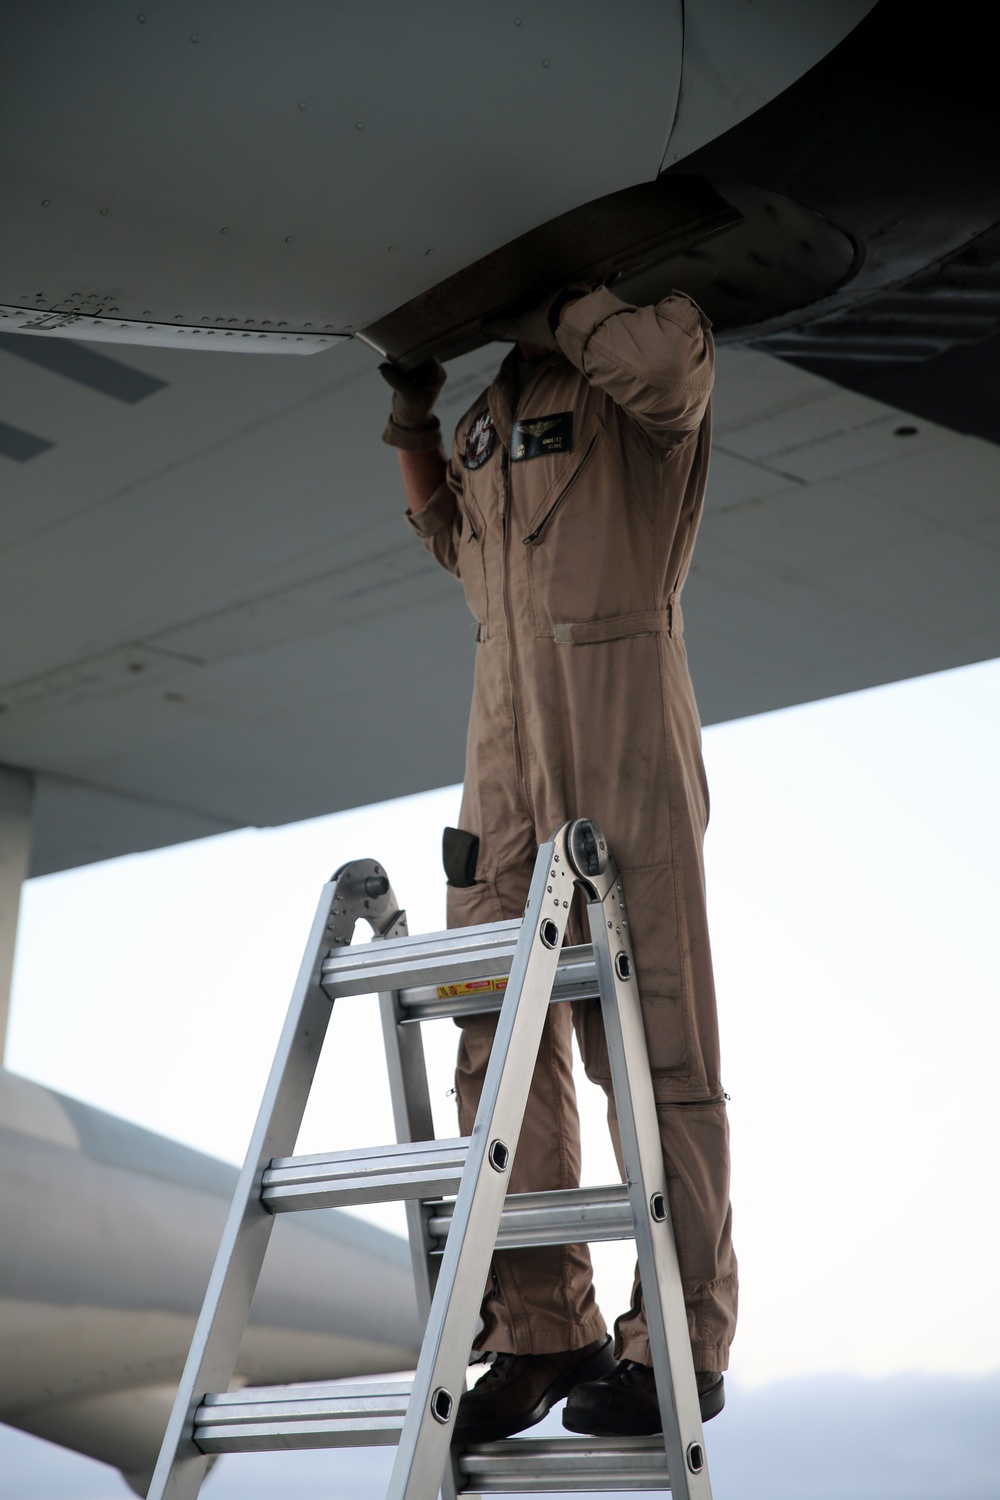 VMGR-252 crew members provide unique support role to aircraft